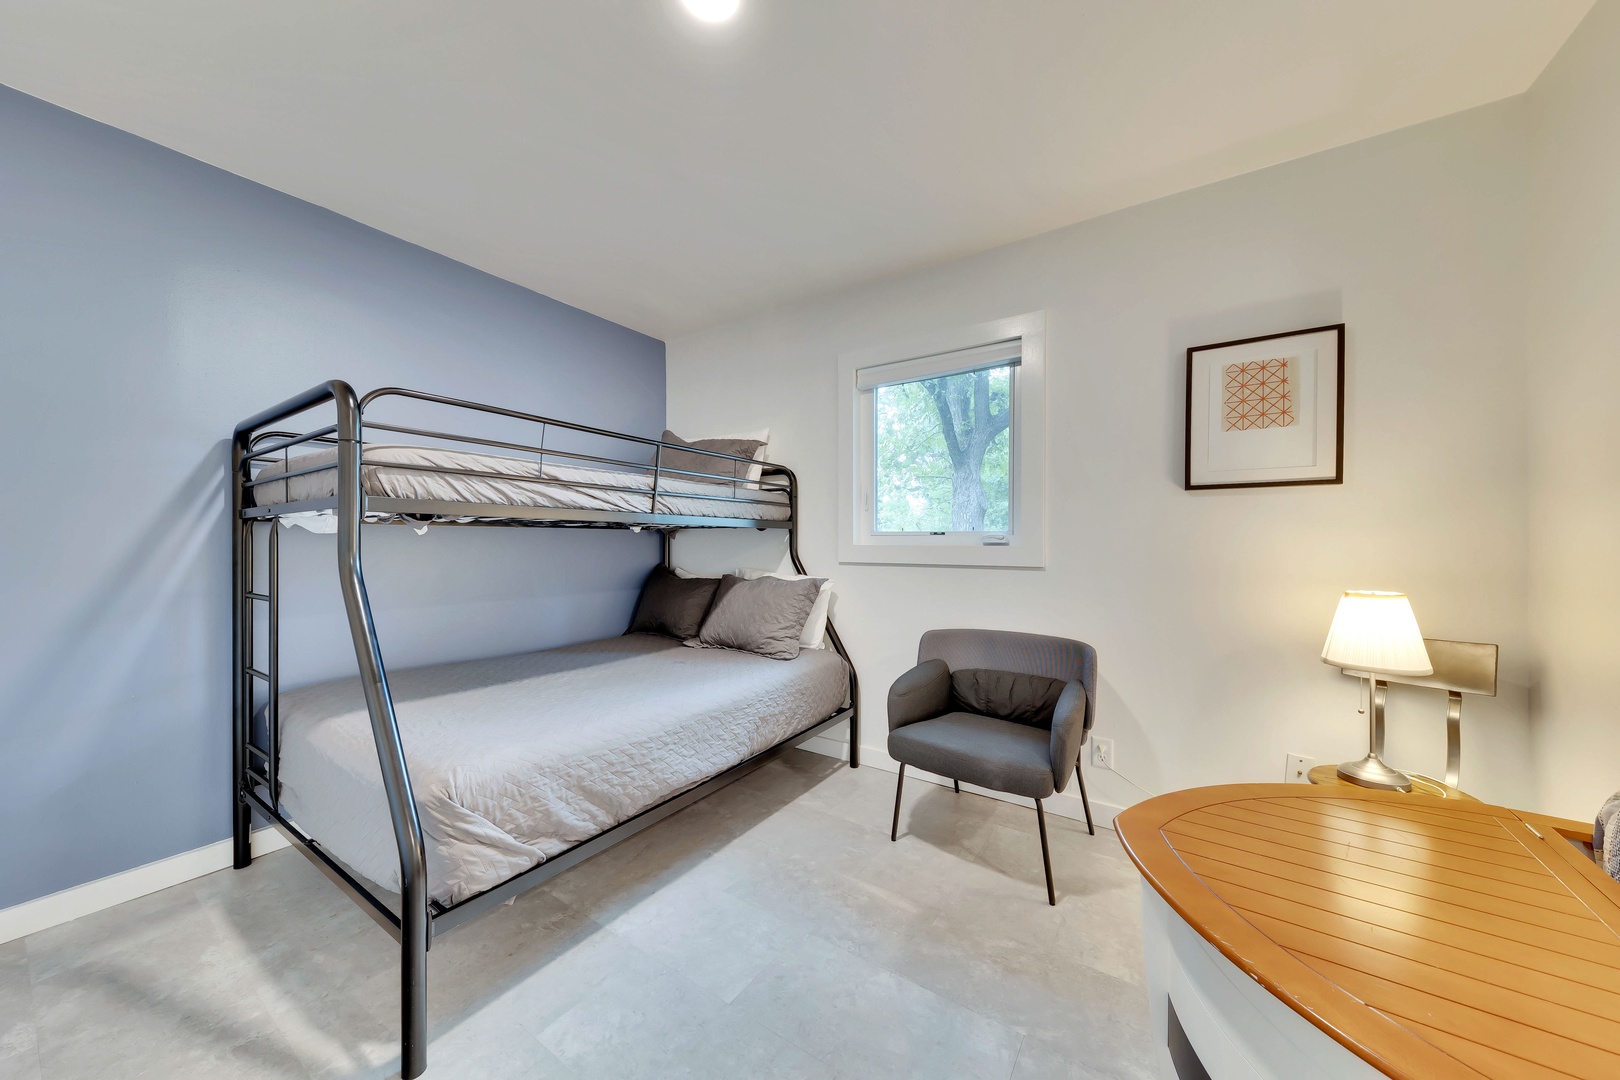 The 4th bedroom offers a queen bed & twin-over-full bunks